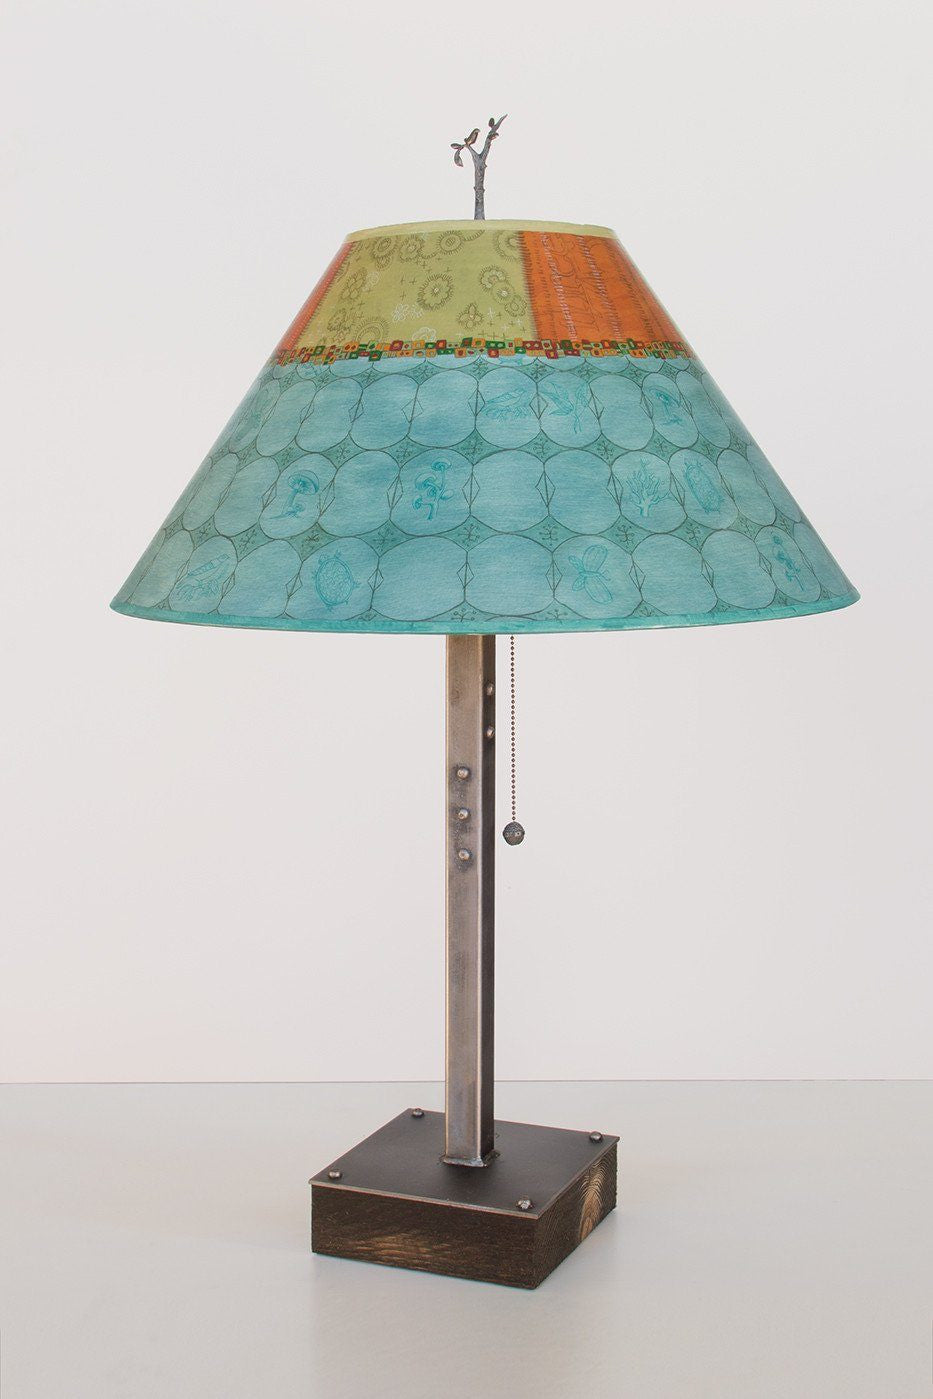 Janna Ugone &amp; Co Table Lamps Steel Table Lamp on Wood with Large Conical Shade in Paradise Pool